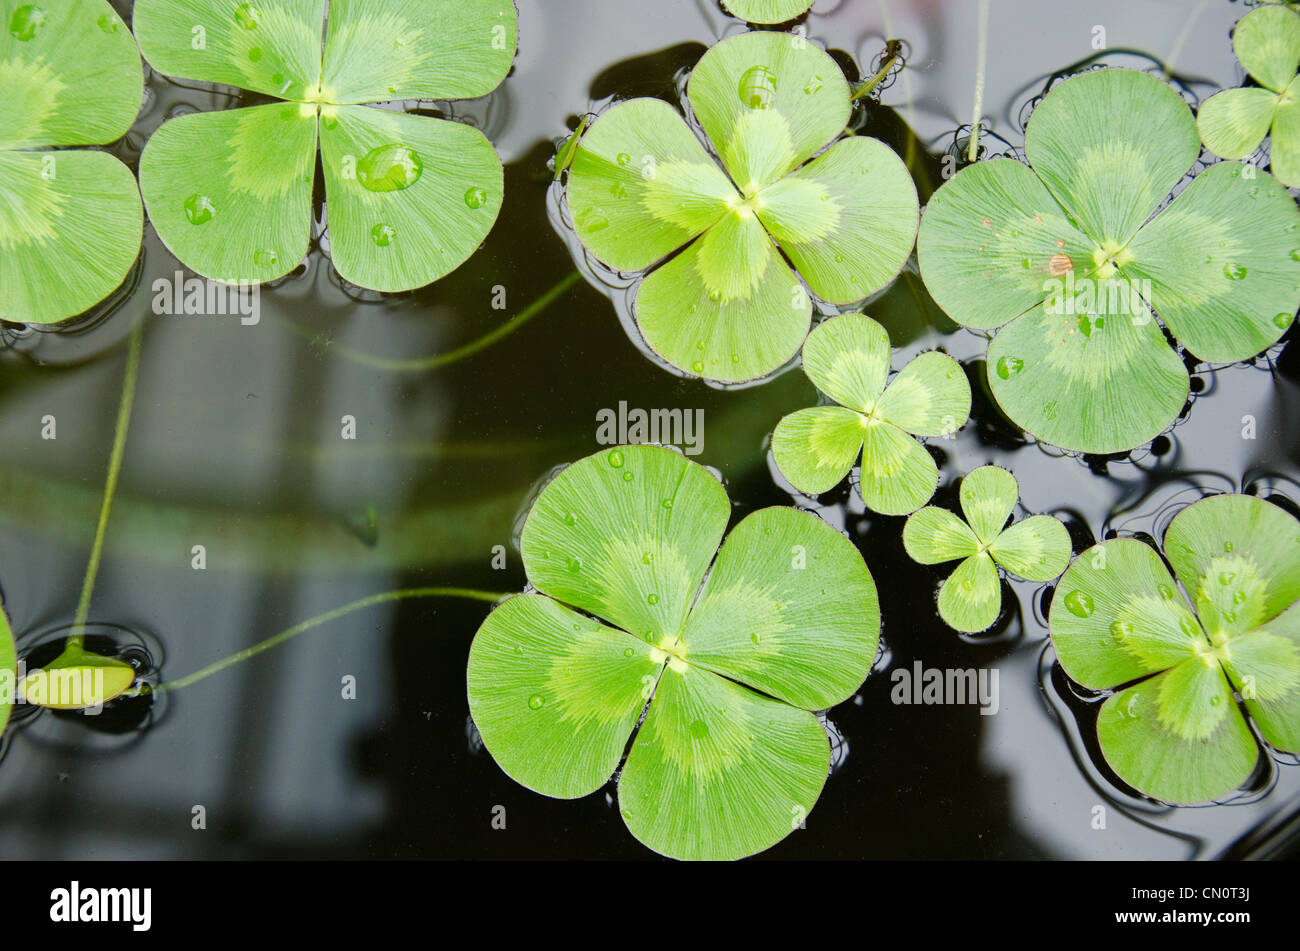 Water clover, Marsilea mutica, with four clover like leaves on water surface Stock Photo